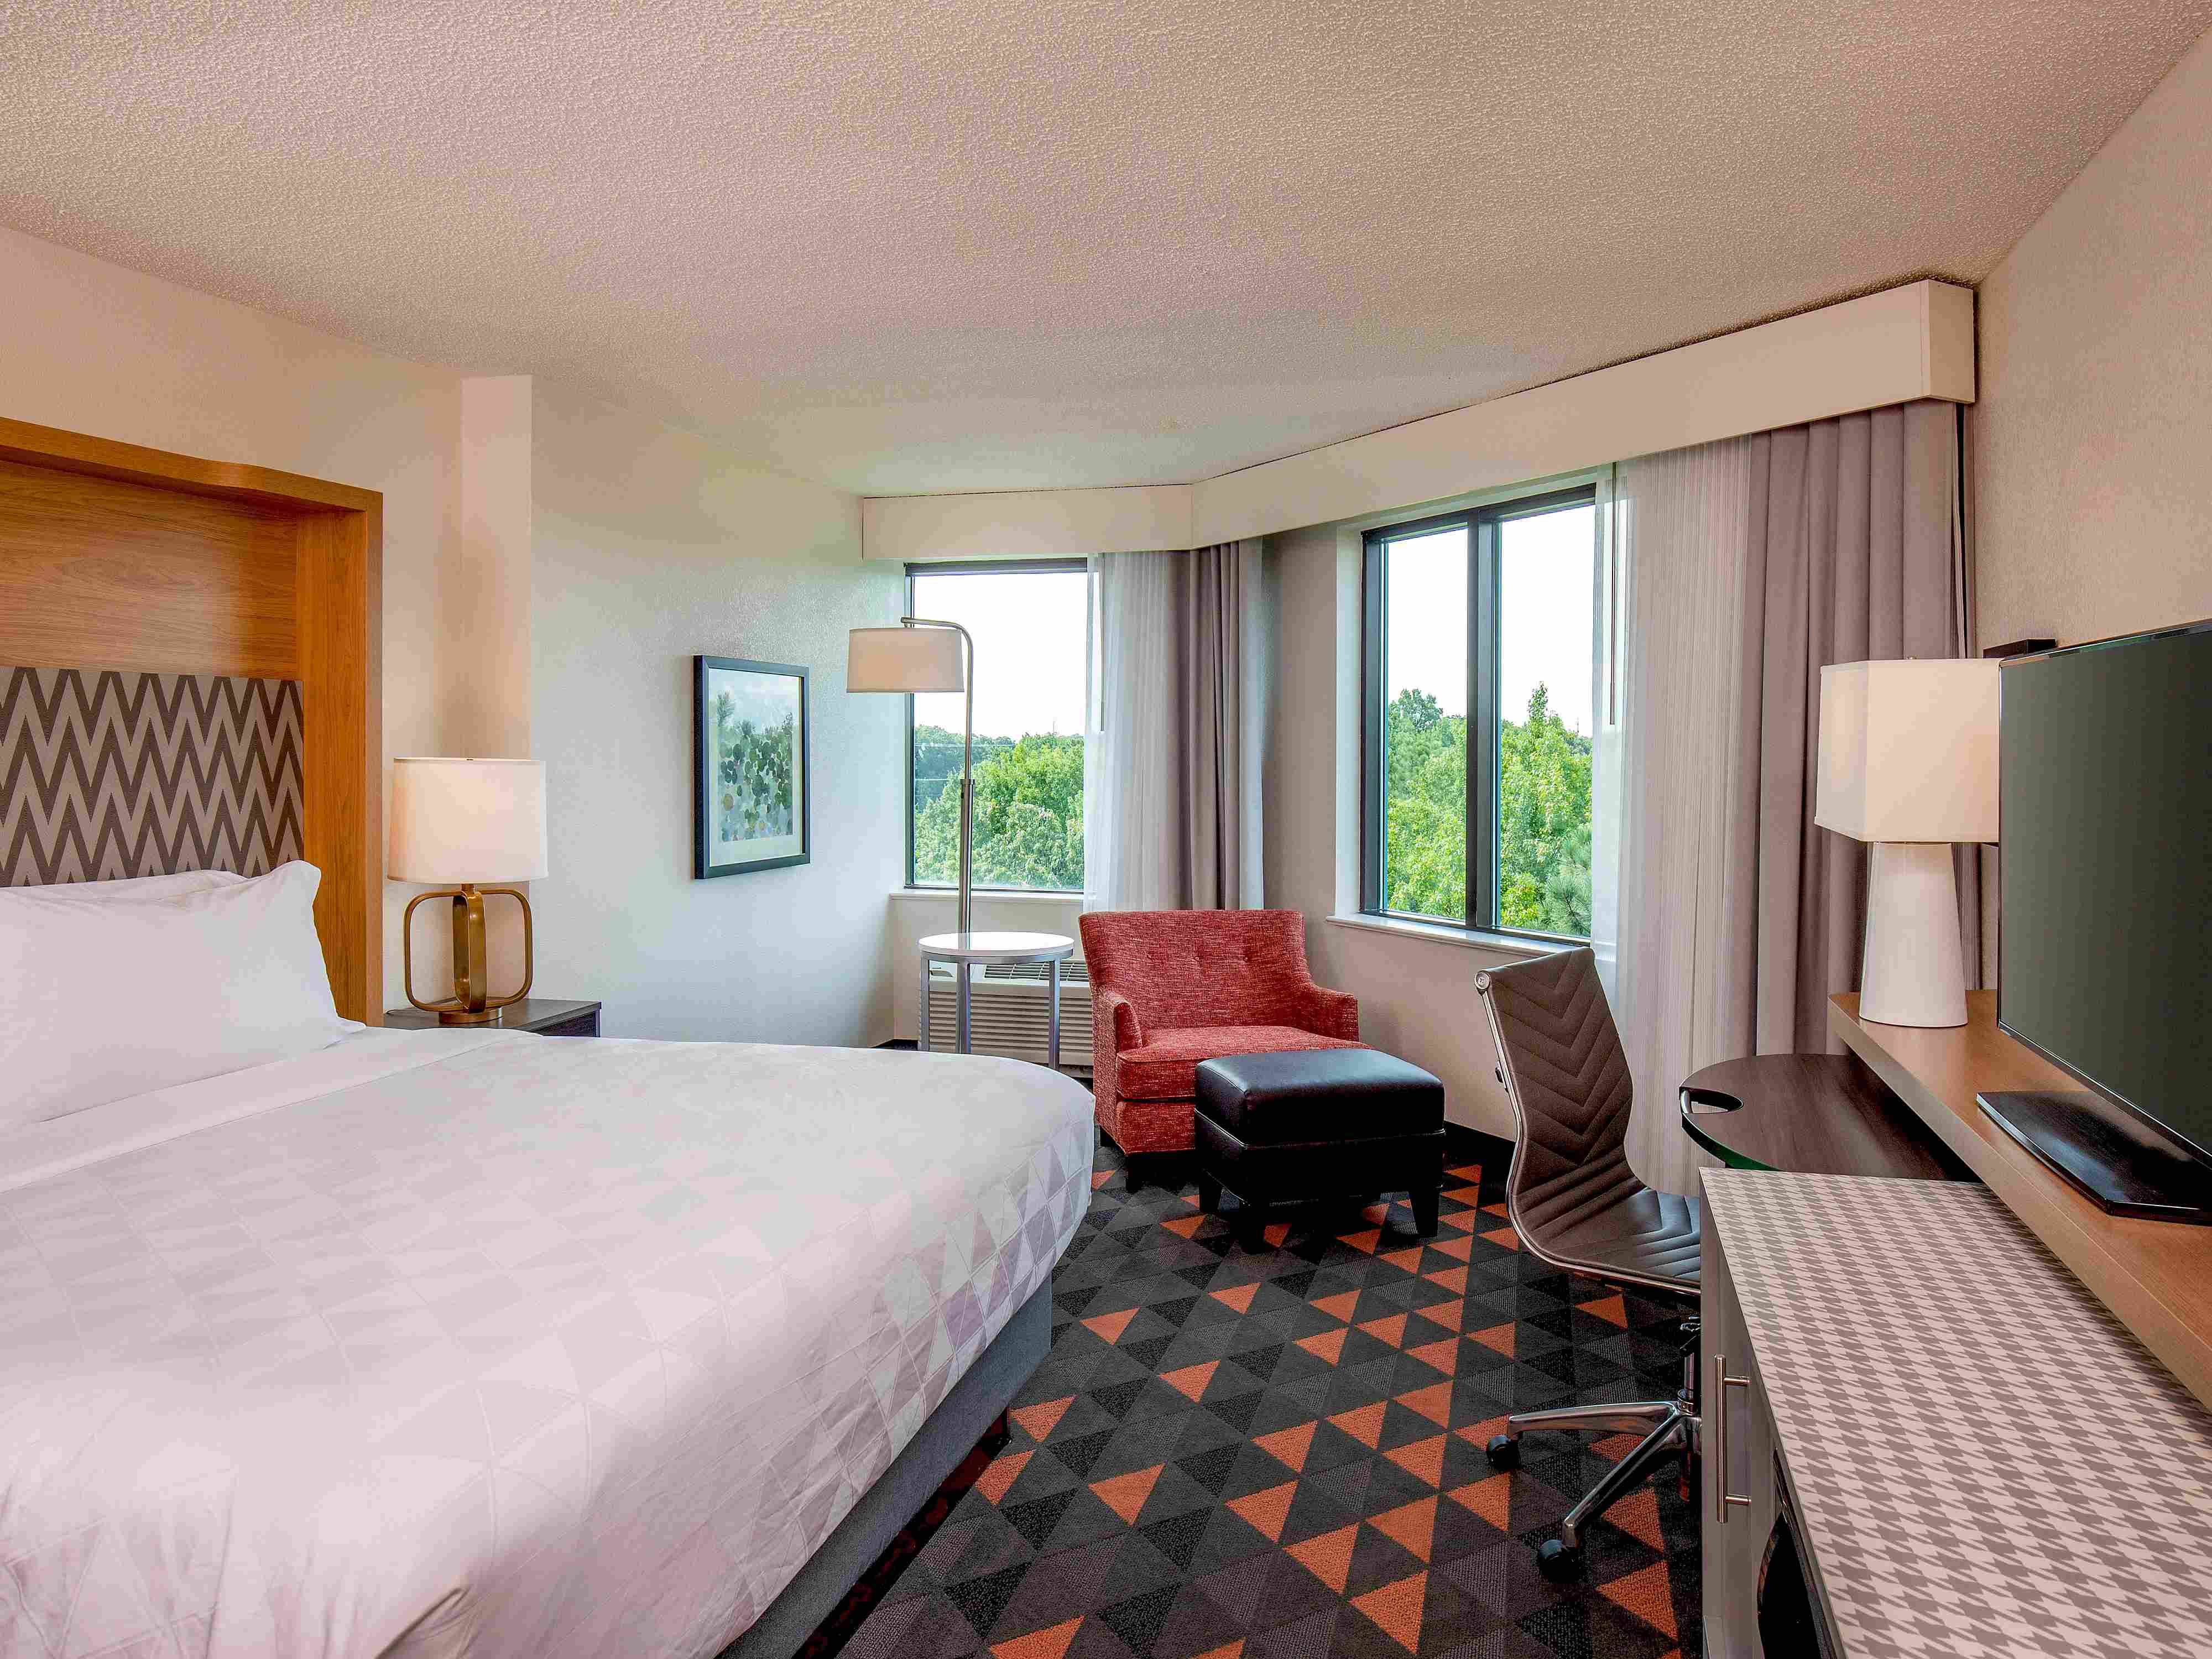 Holiday Inn Express Newport Guest Room & Suite Options